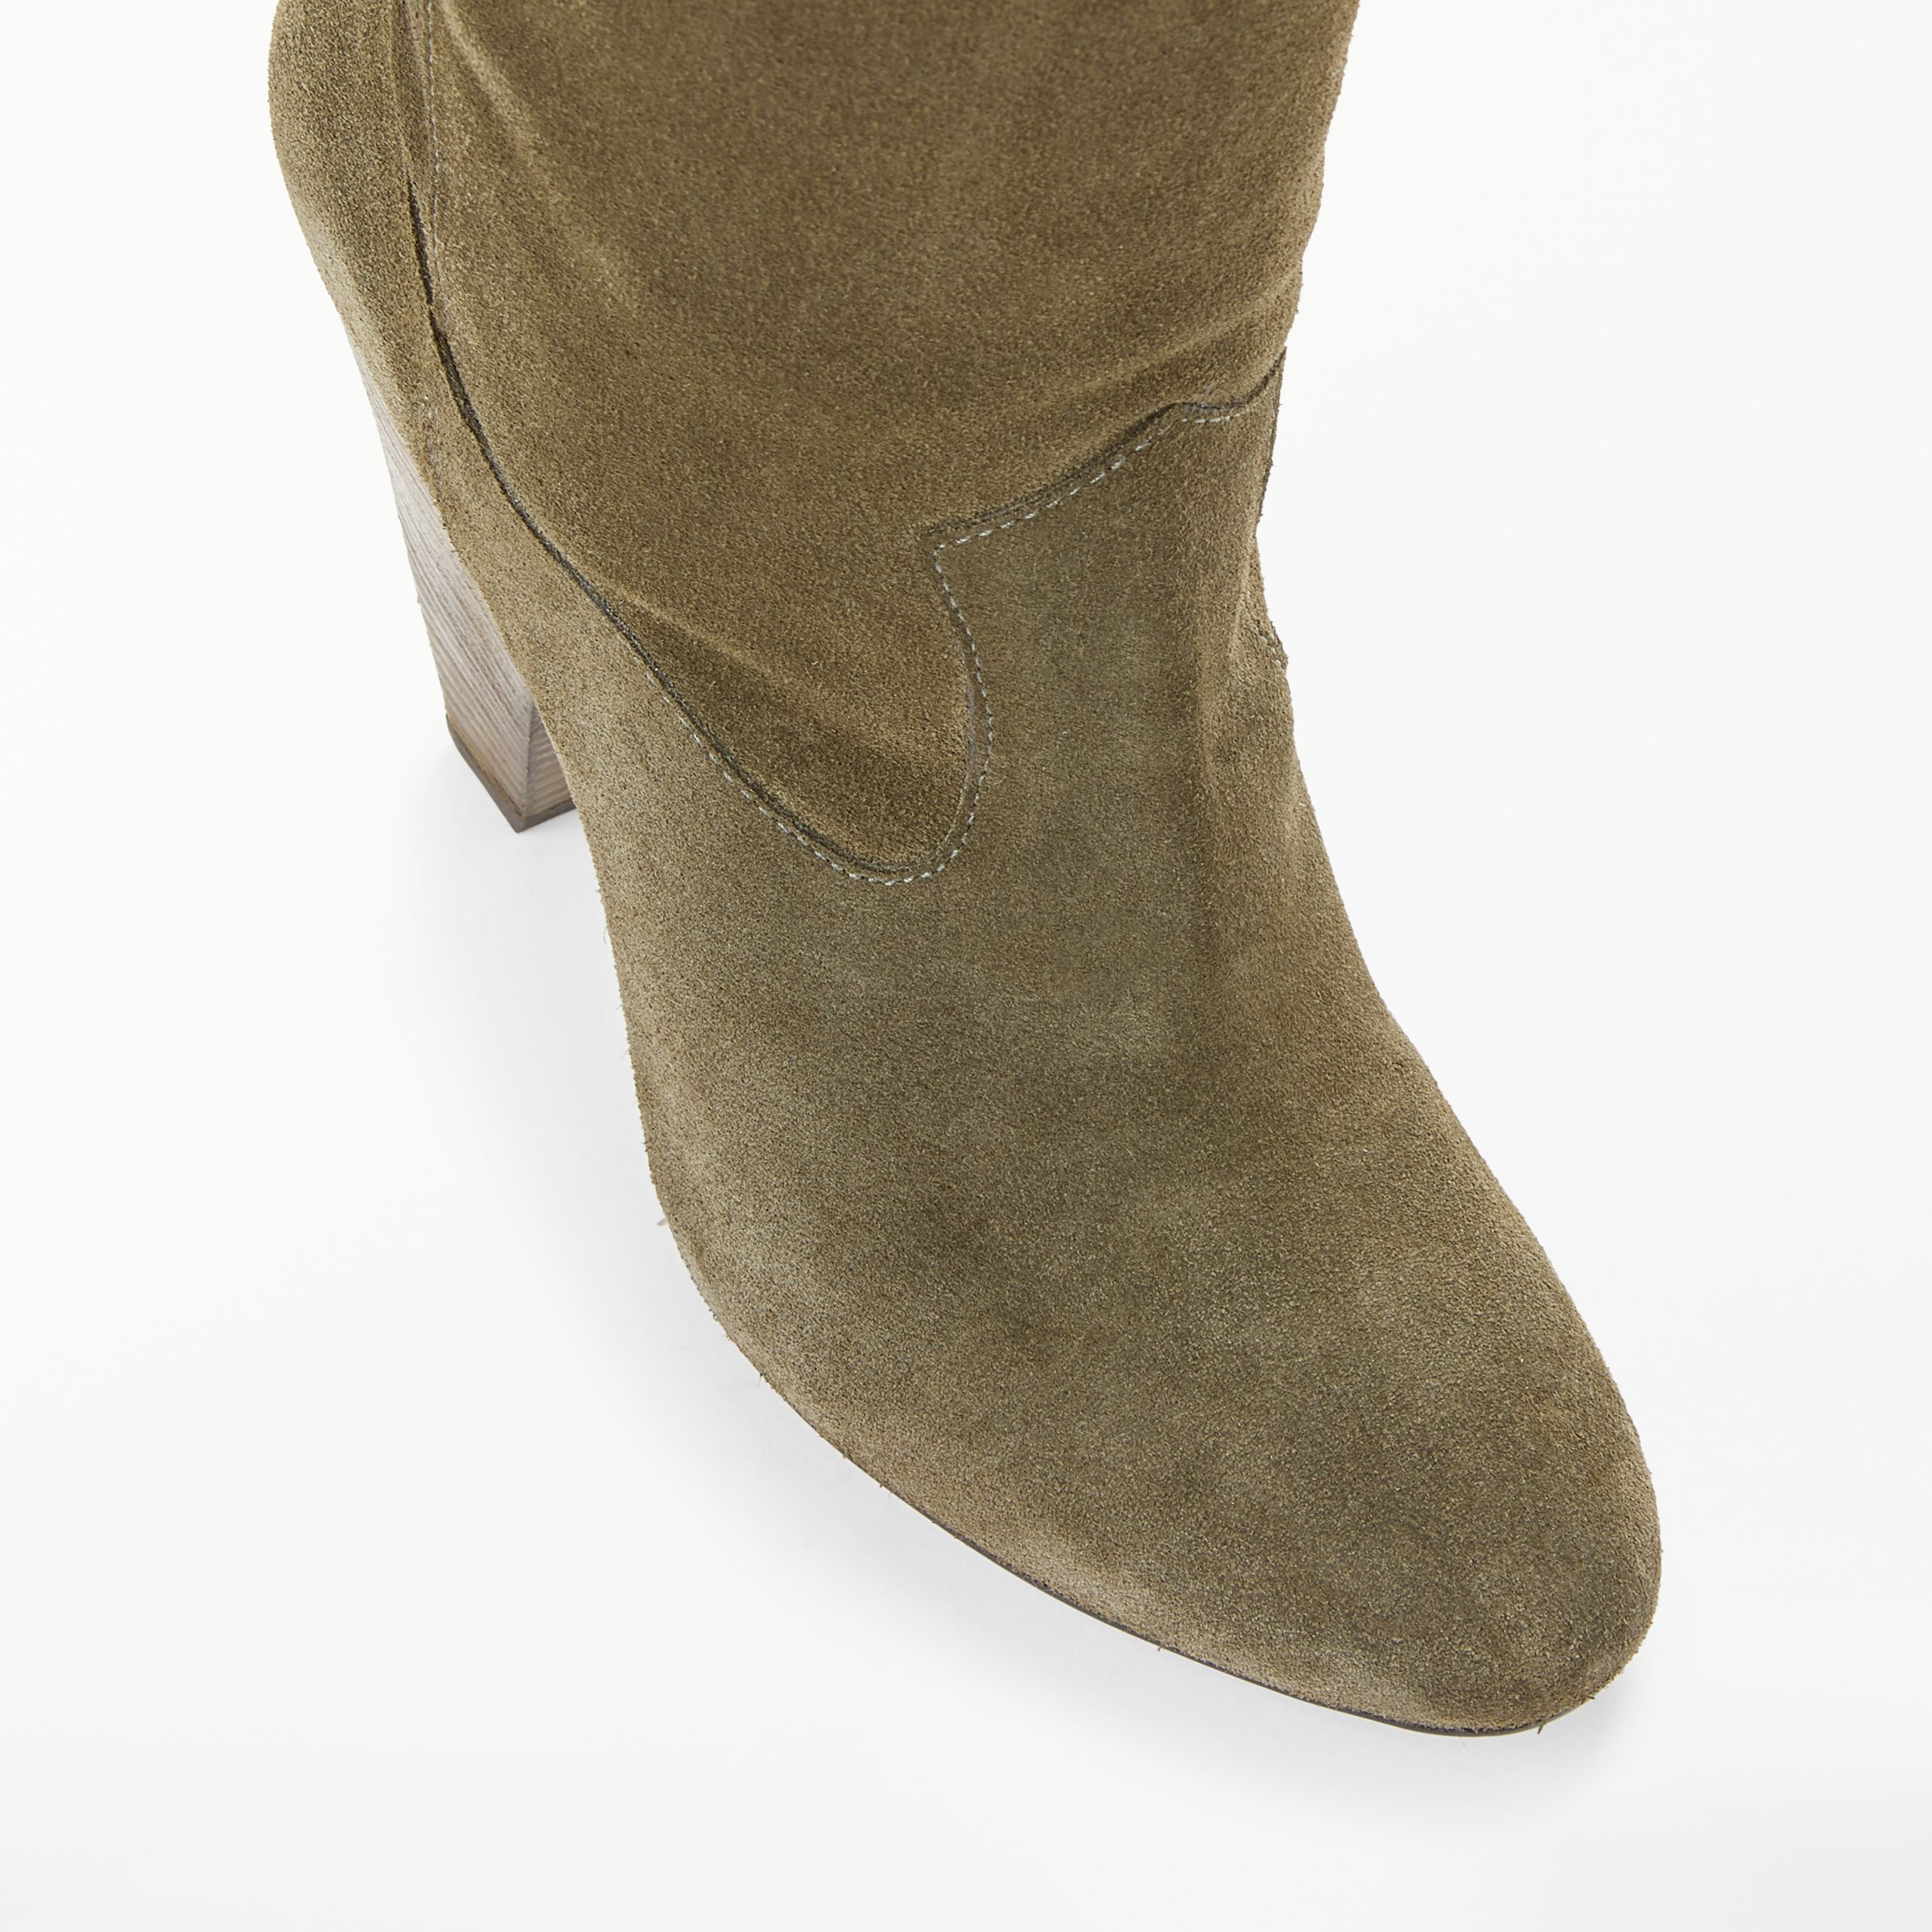 long green suede boots